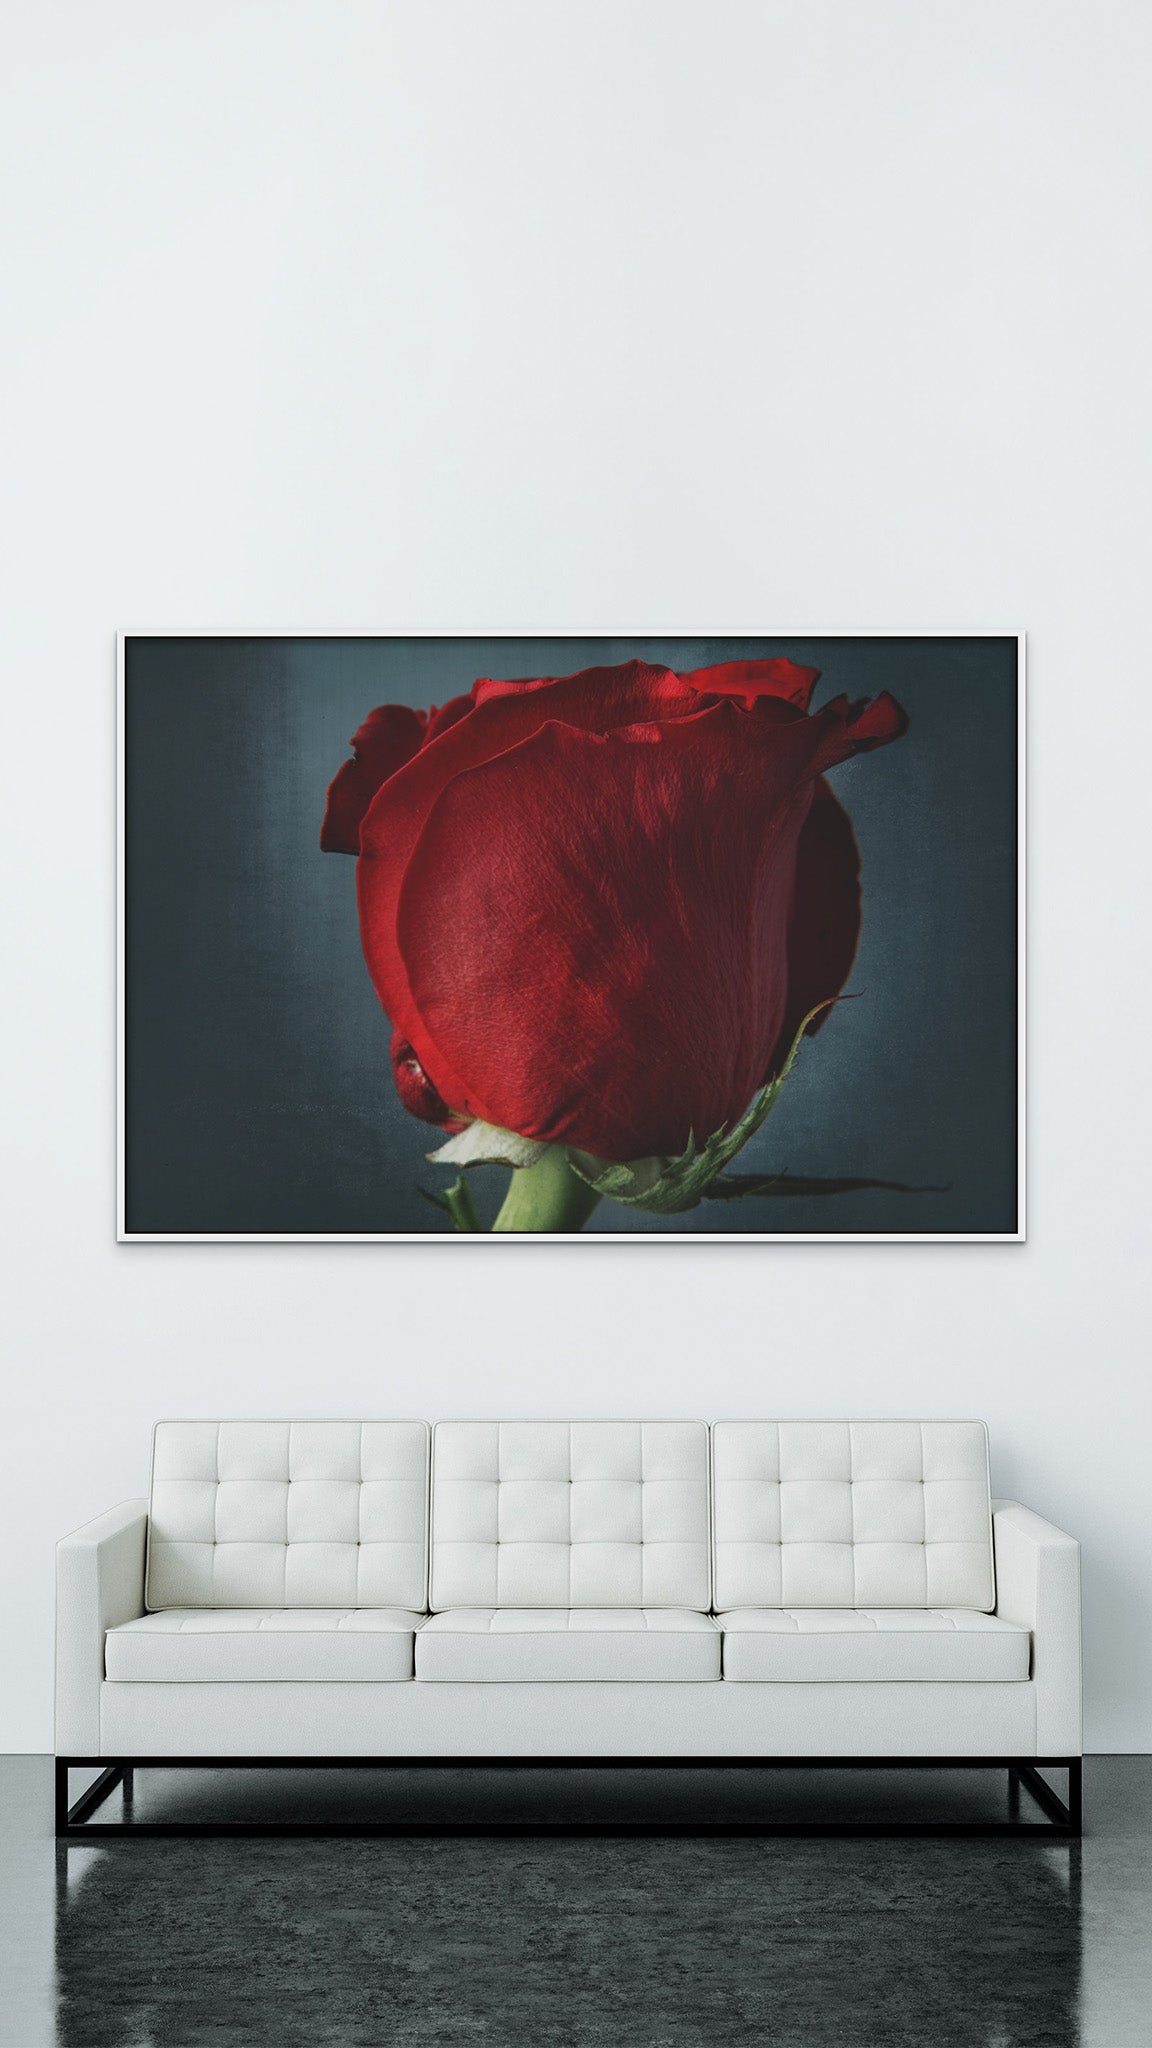 Large picture hanging on the wall of a white room. There is also a white sofa in the room. The picture is a fine art flower photography of a red rose tilted "Dangerous" by Cameron Dreaux of Dreaux Fine Art.